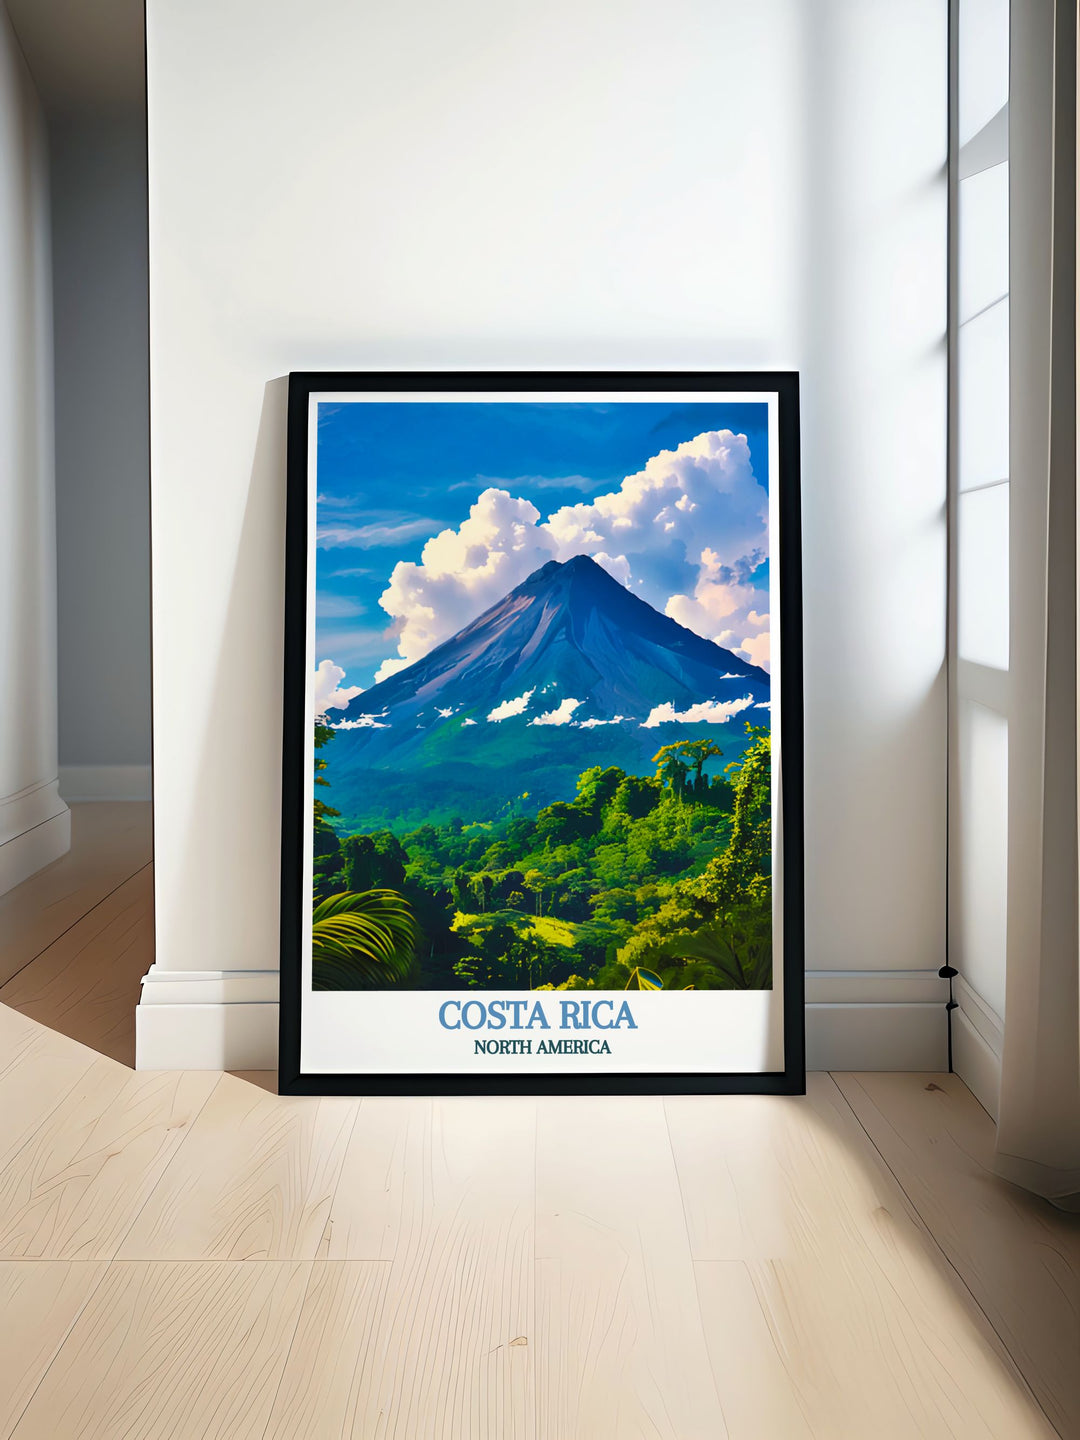 Marvel at the awe inspiring beauty of Arenal Volcano with this travel poster, capturing its majestic peak and lush surroundings, perfect for bringing the power of Costa Ricas landscapes into your home decor.